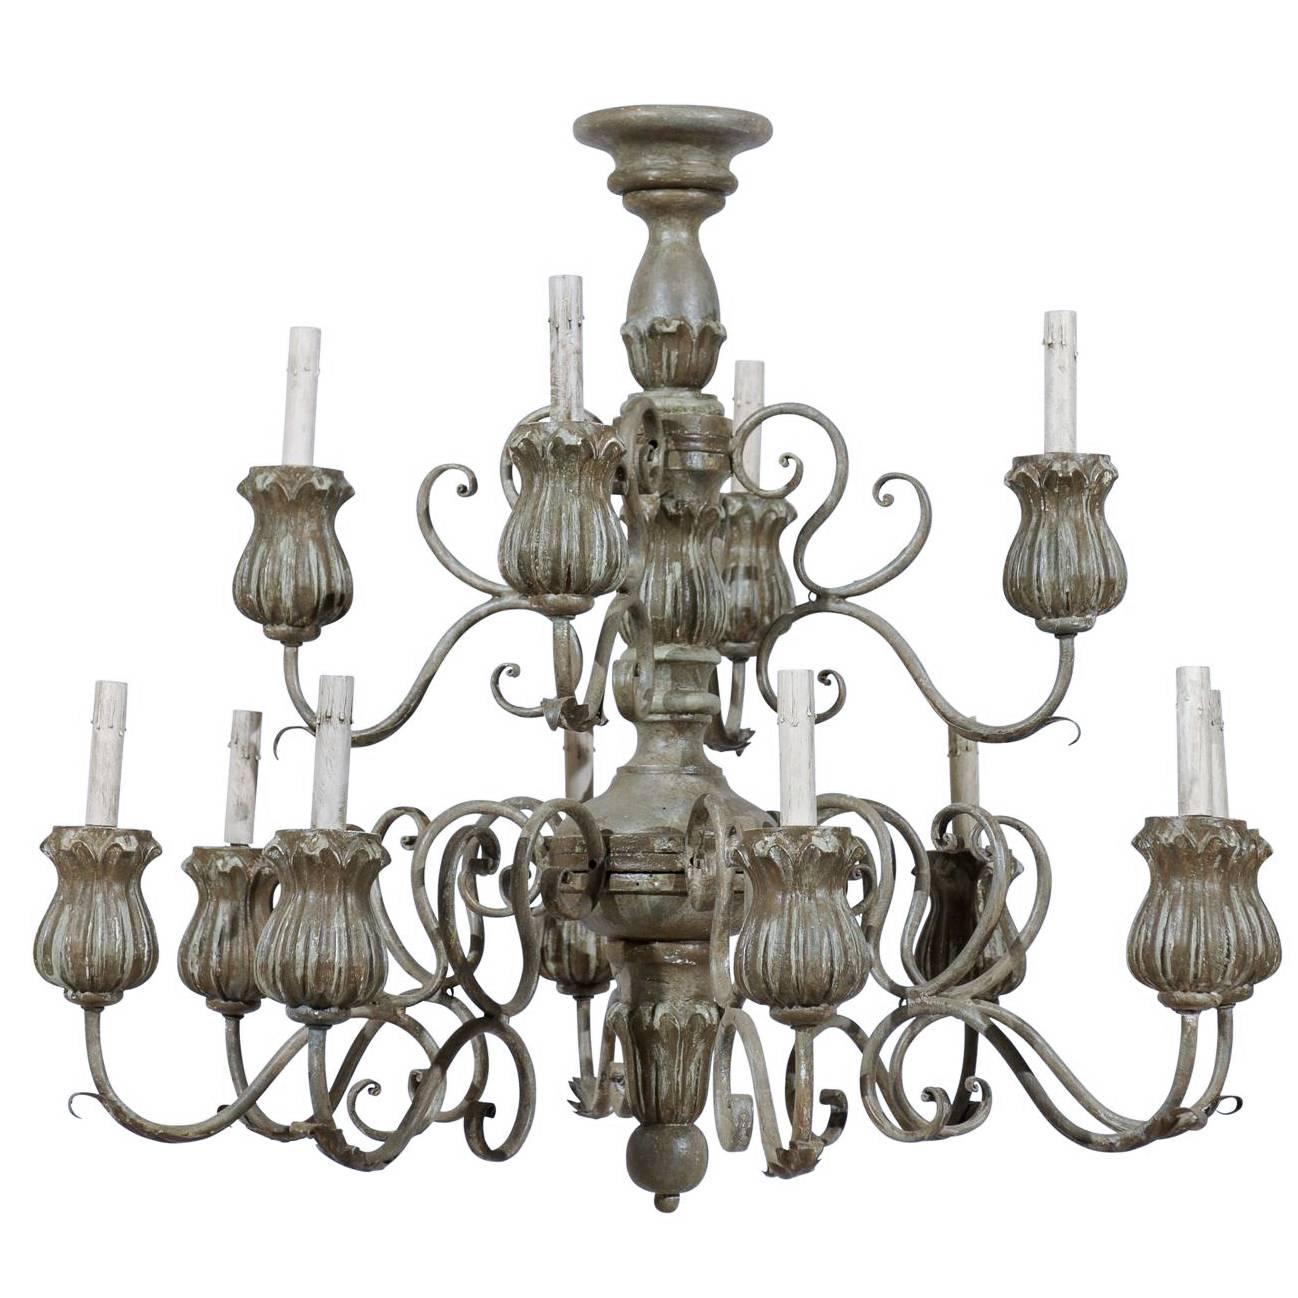 Italian 2-Tier, 12-Light Painted Wood Chandelier with Flower Shaped Bobeches